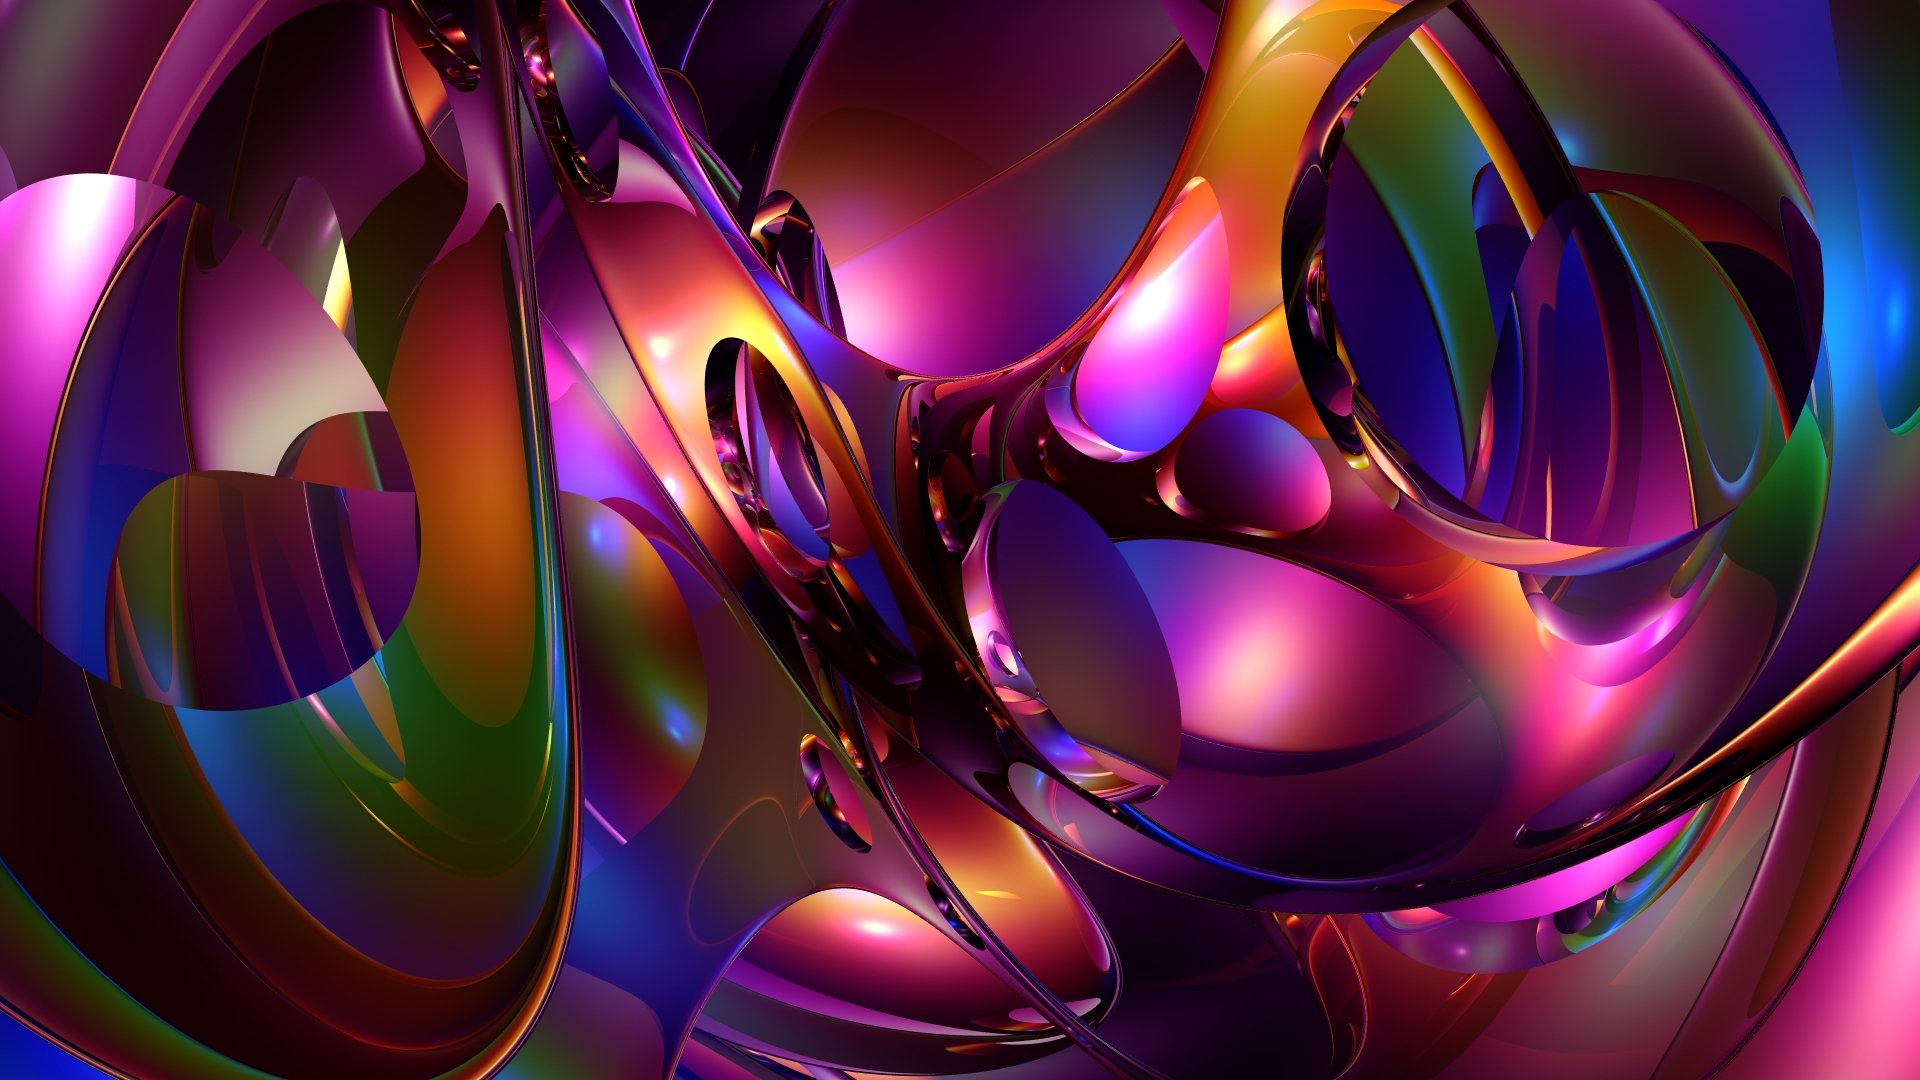 abstract, Art, Colorful, Colors, Design, Illustration